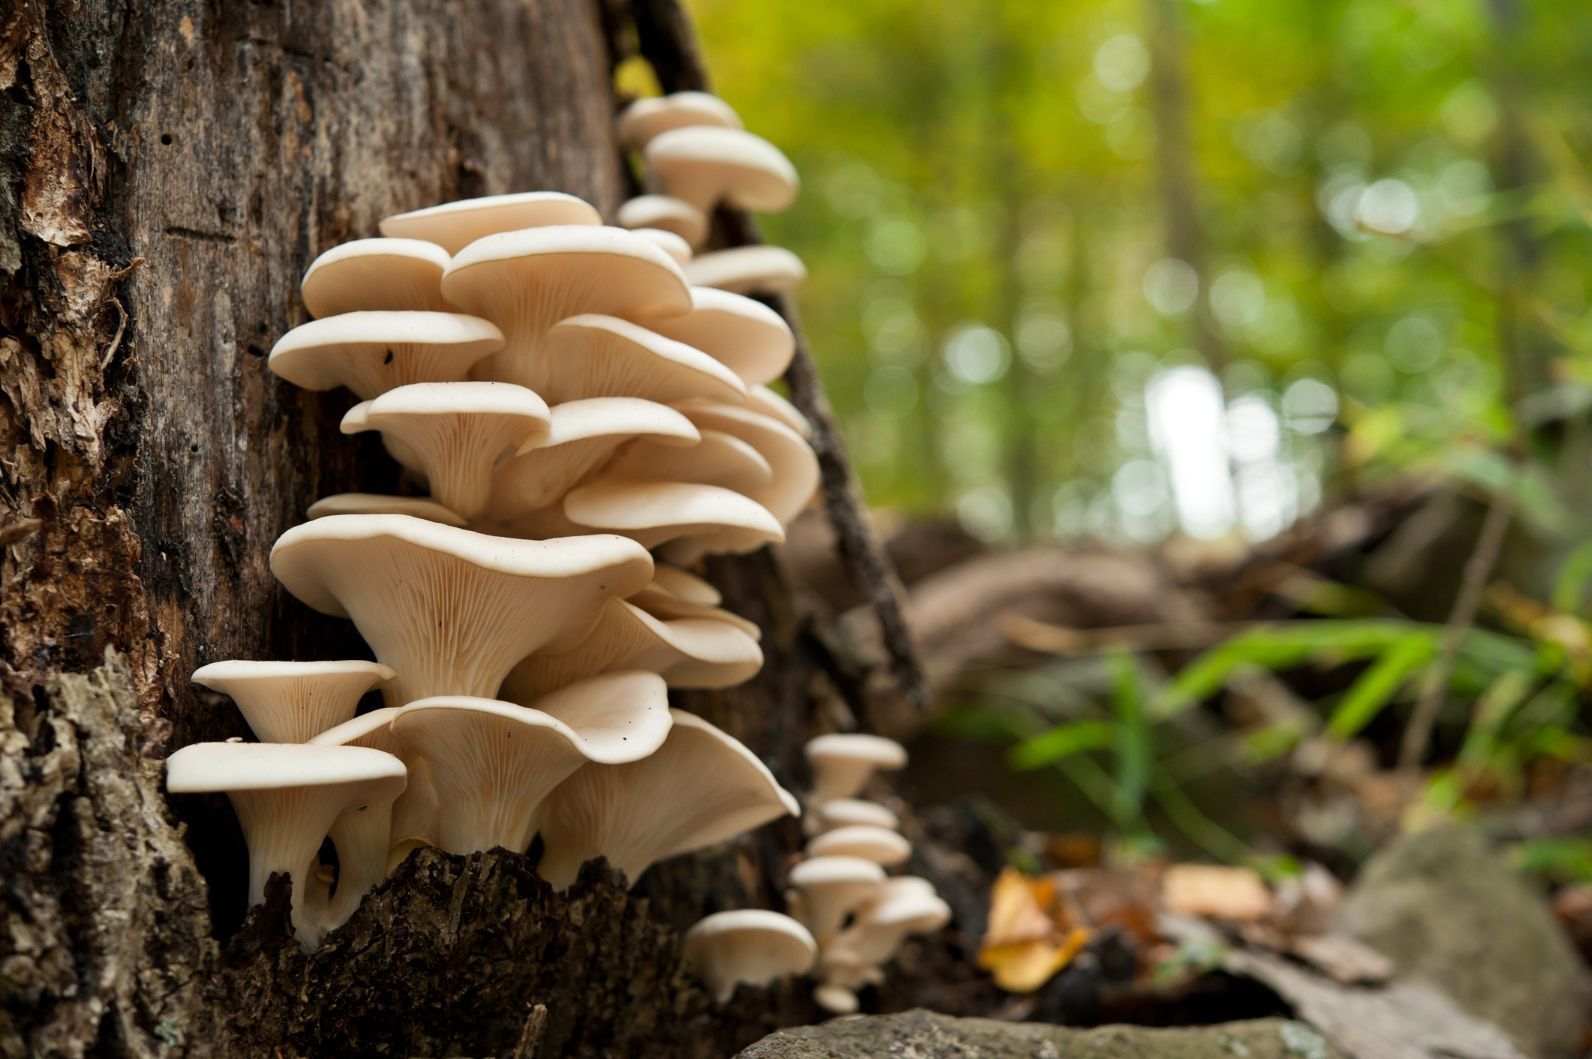 A new study suggests the mushrooms on this tree, and those behind, may be chatting away. Photo: Getty